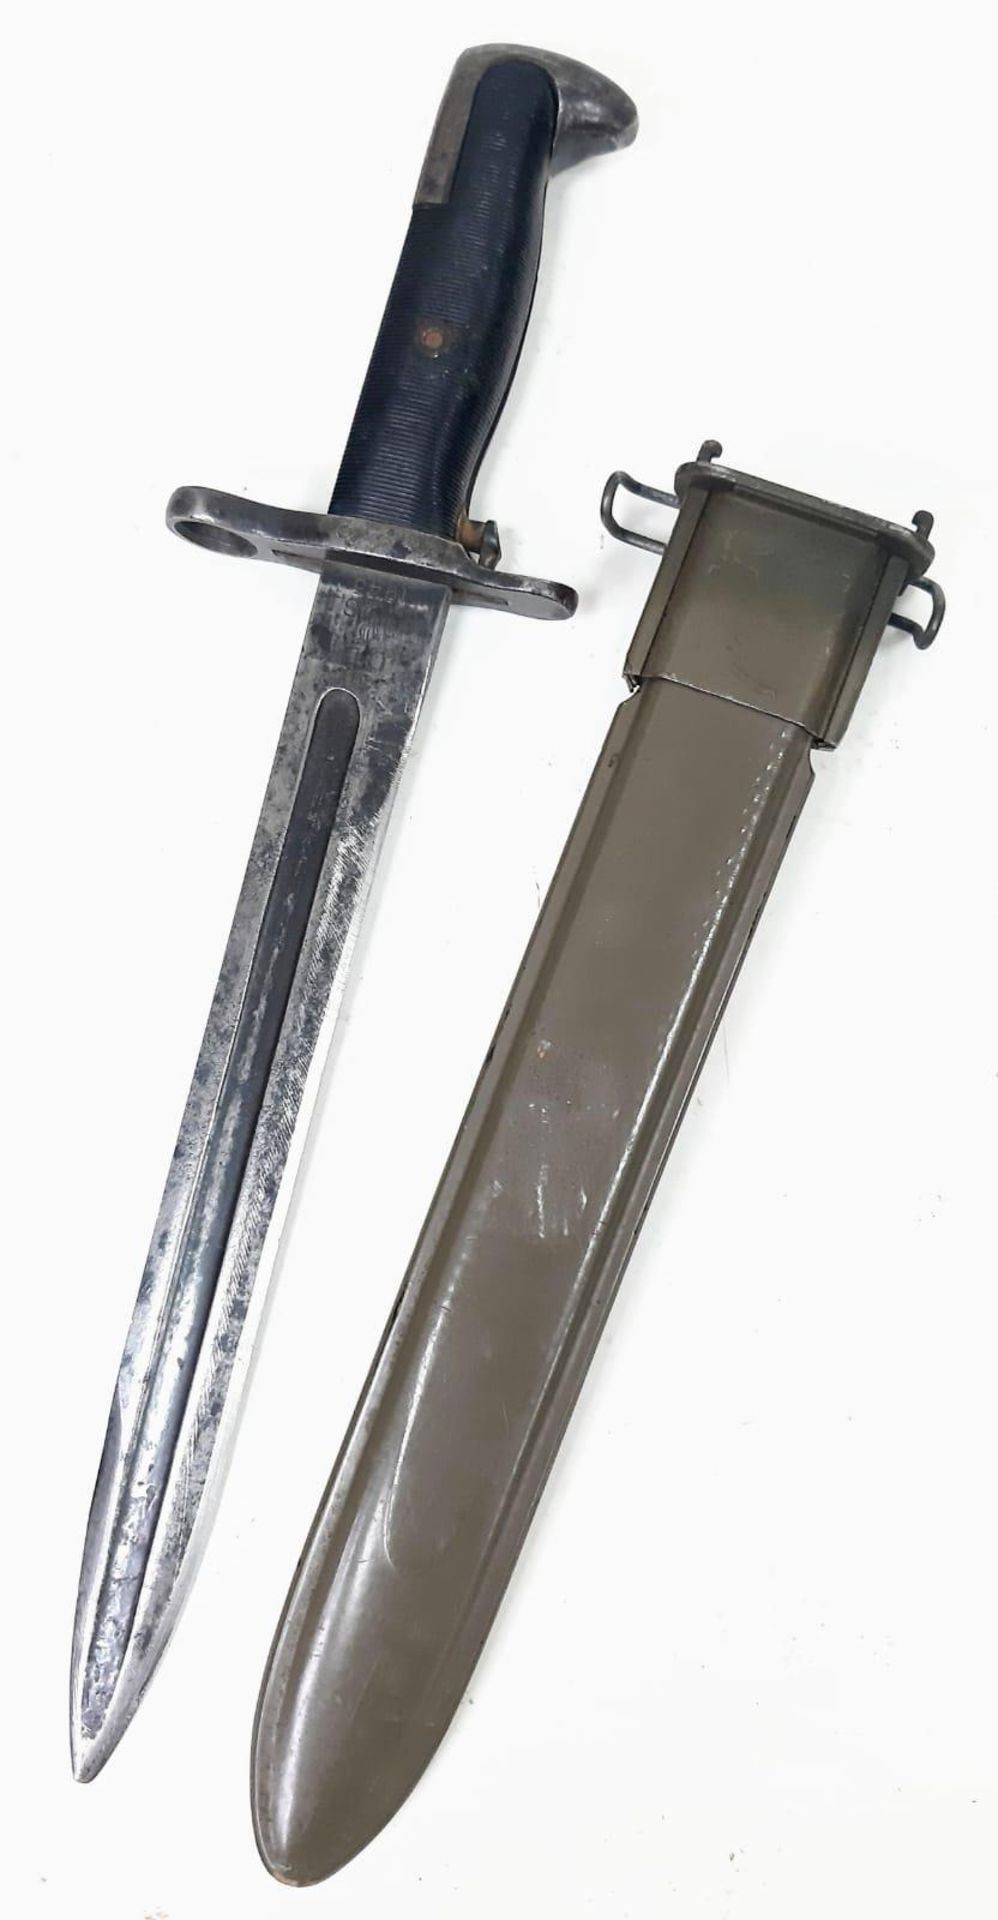 WW2 US M1 (E) Garand bayonet Dated 1943. Rare maker: Oneida Limited. This is a “E” which stood for